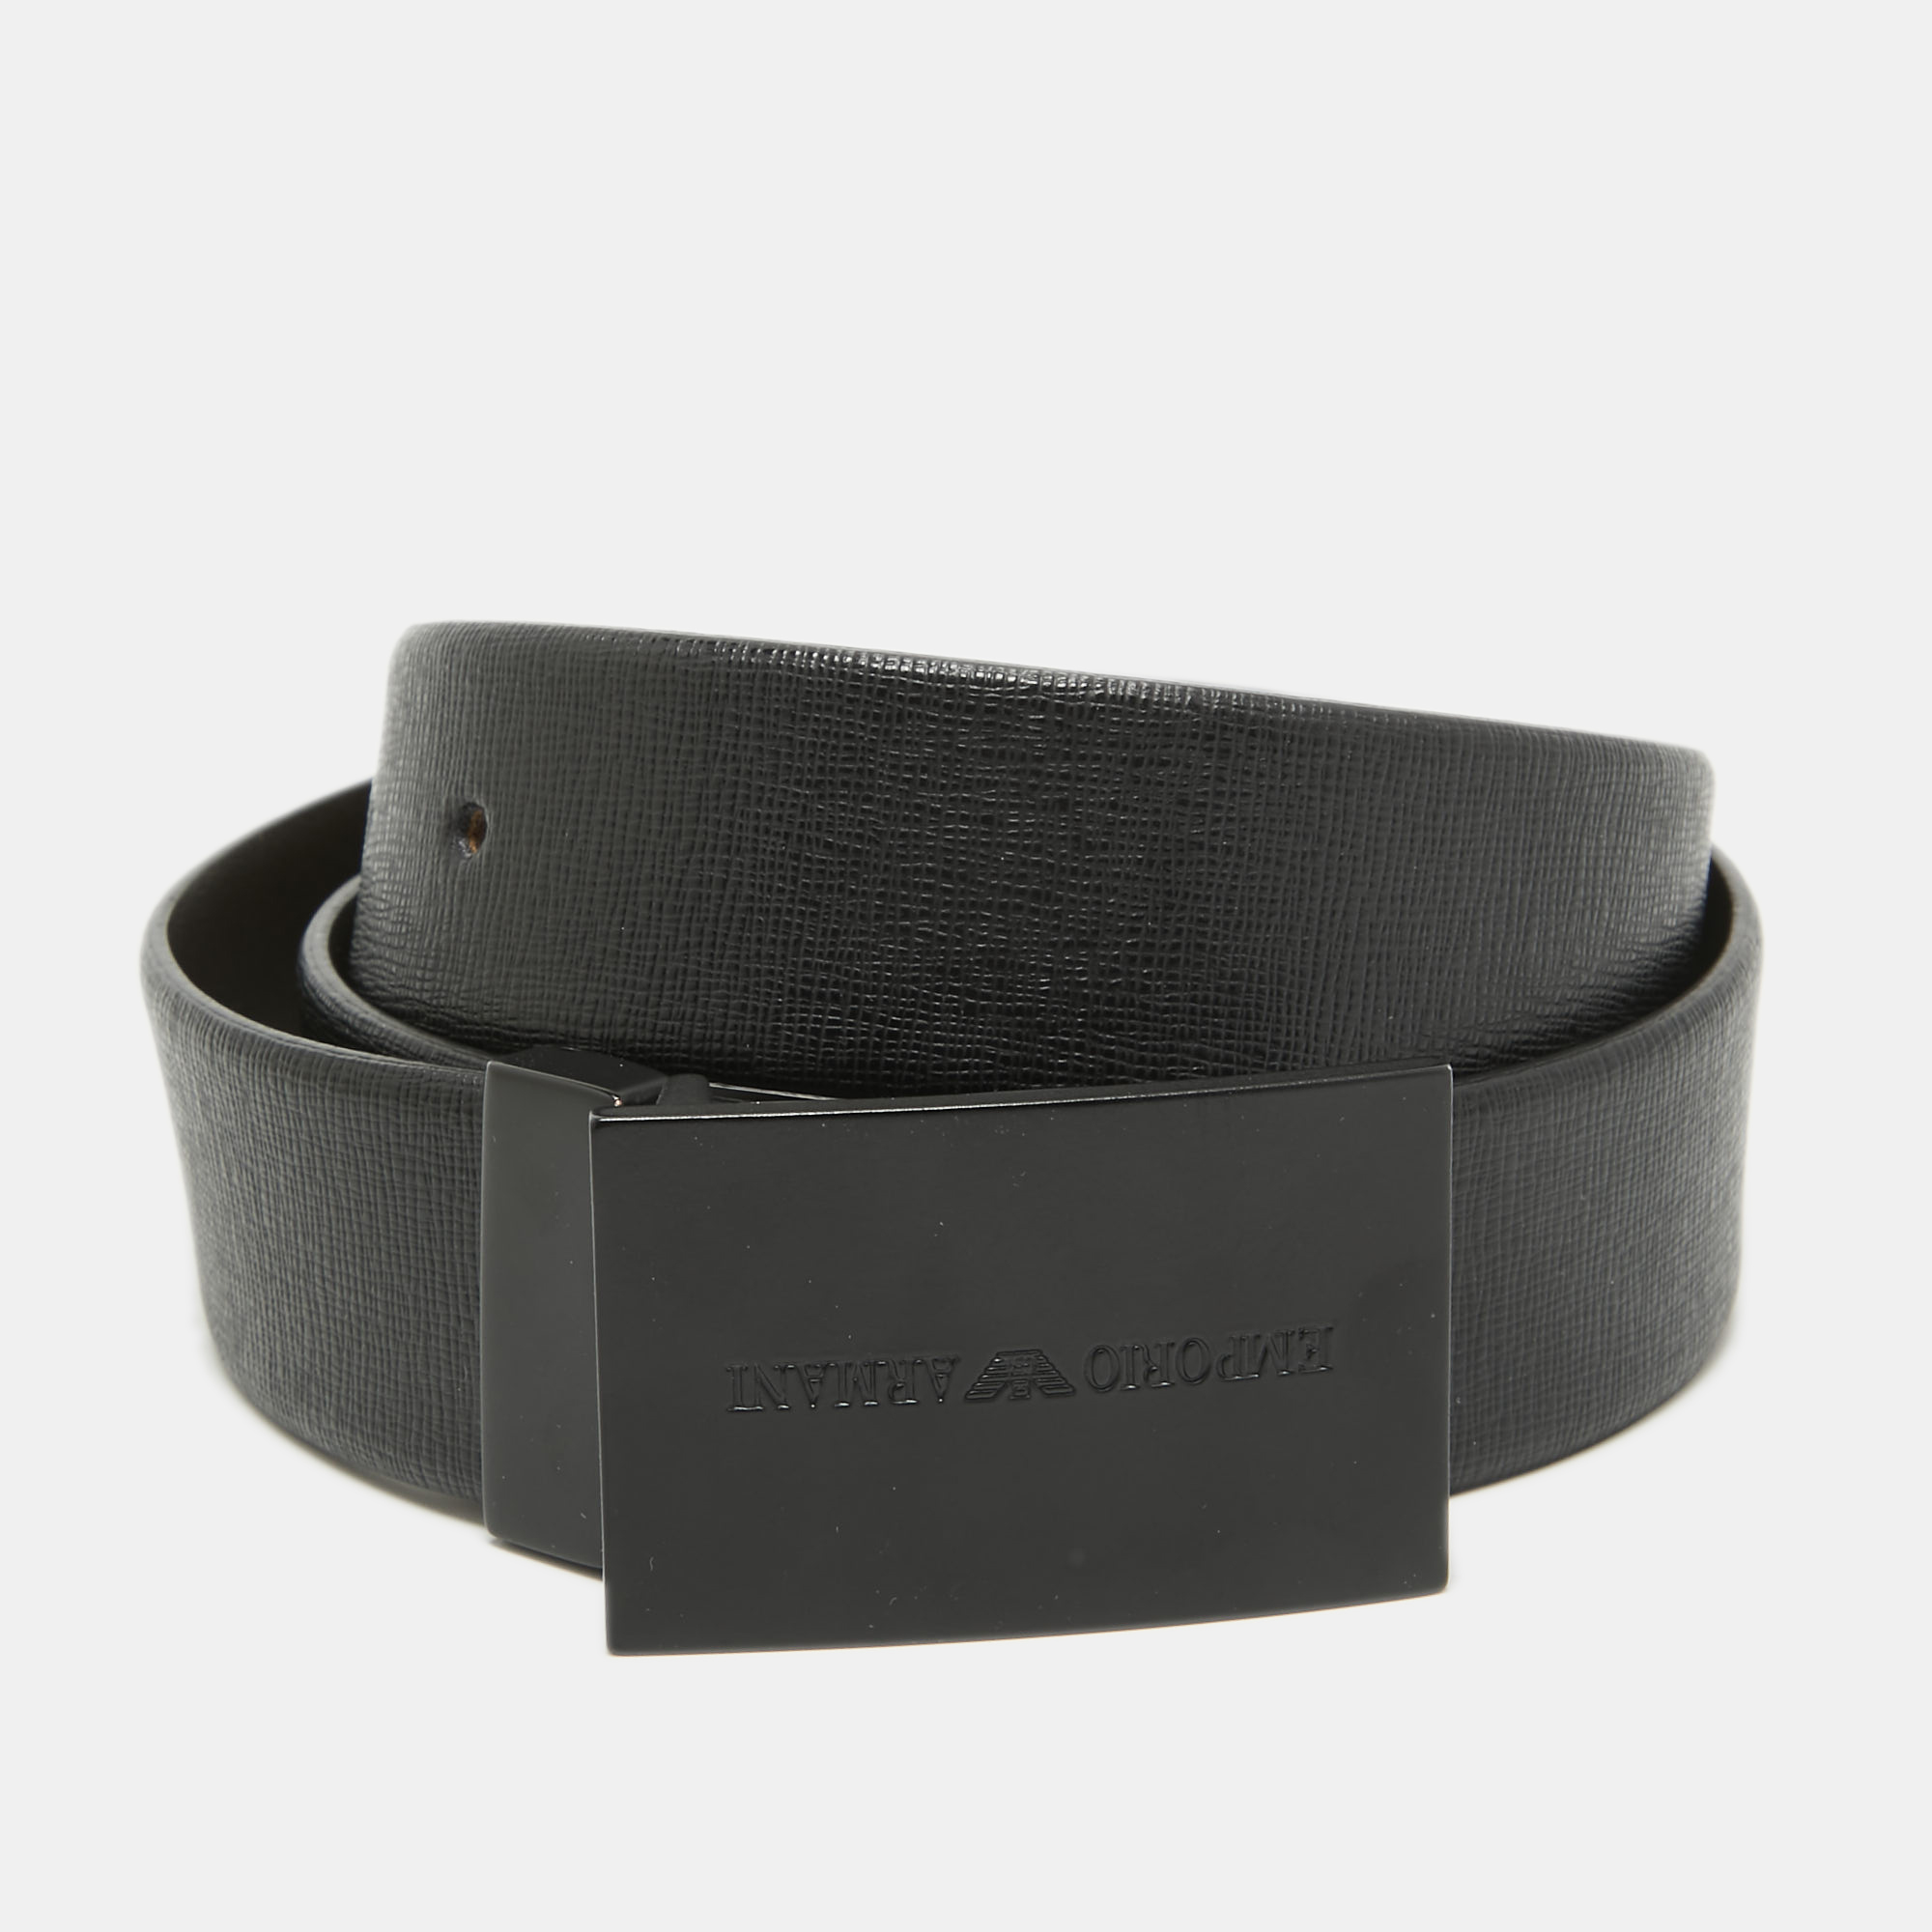 Emporio Armani Black/Choco Brown Leather Reversible Cut To Size Buckle Belt